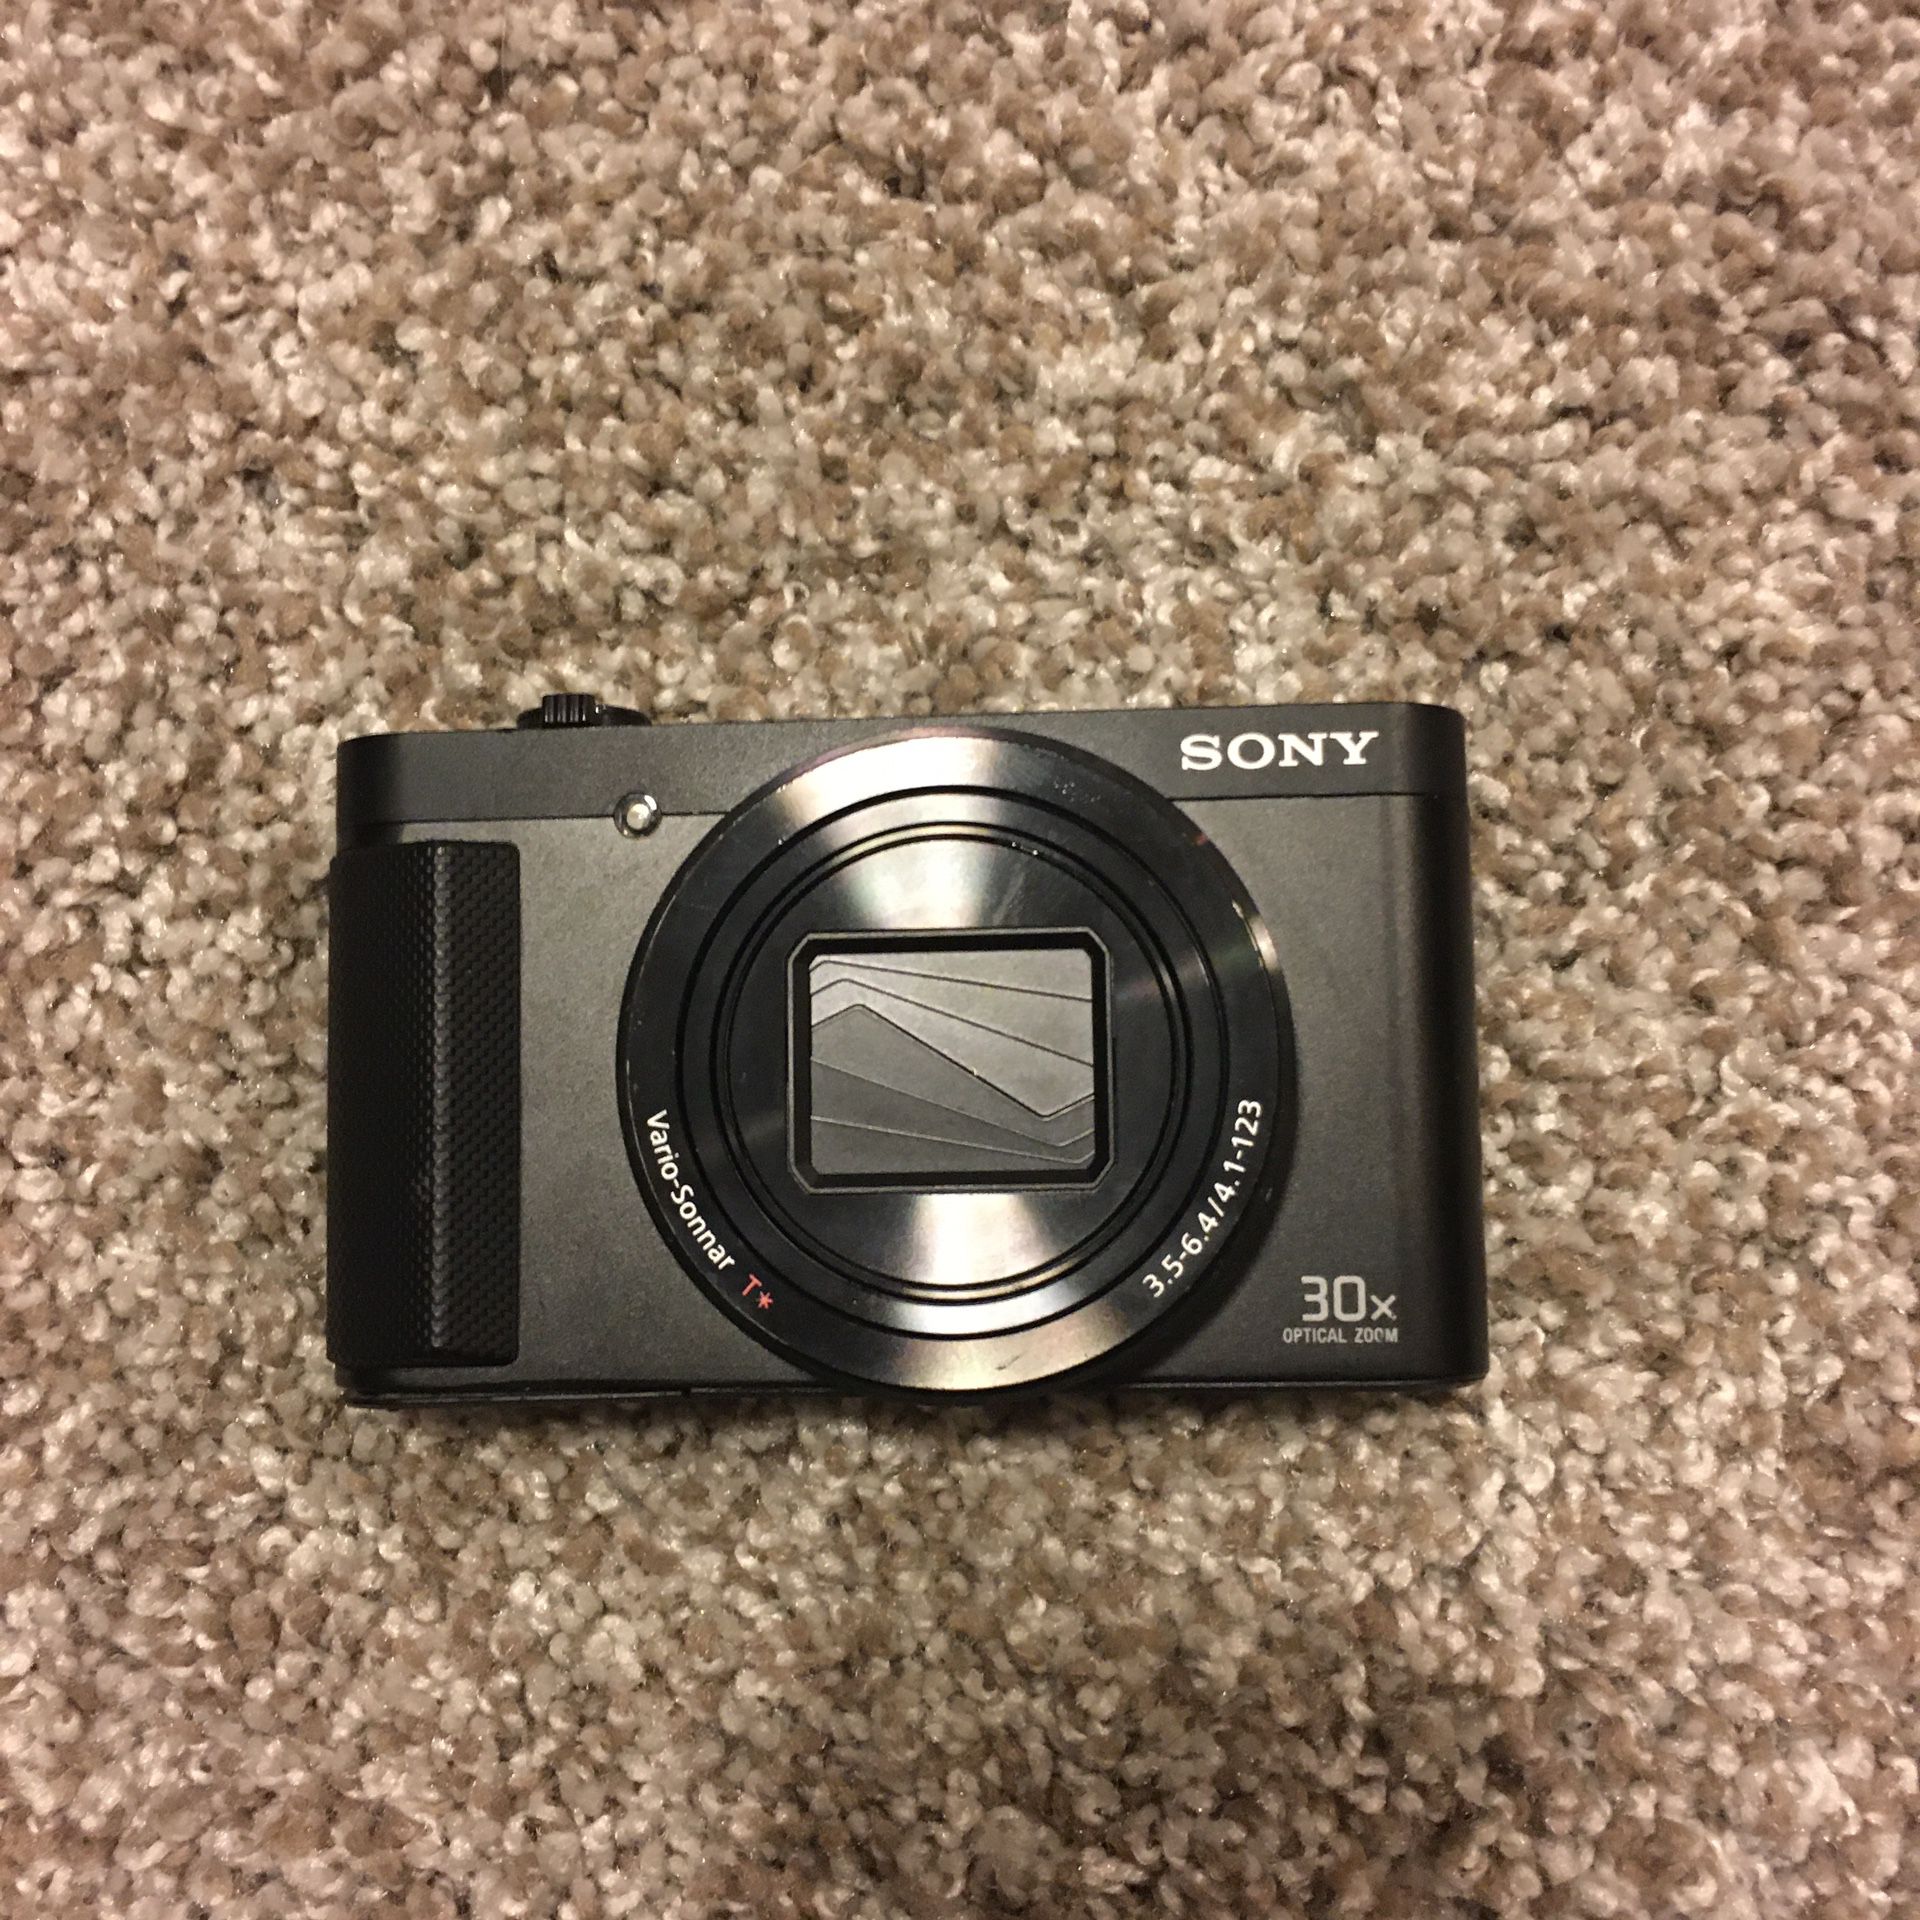 Sony point and shoot